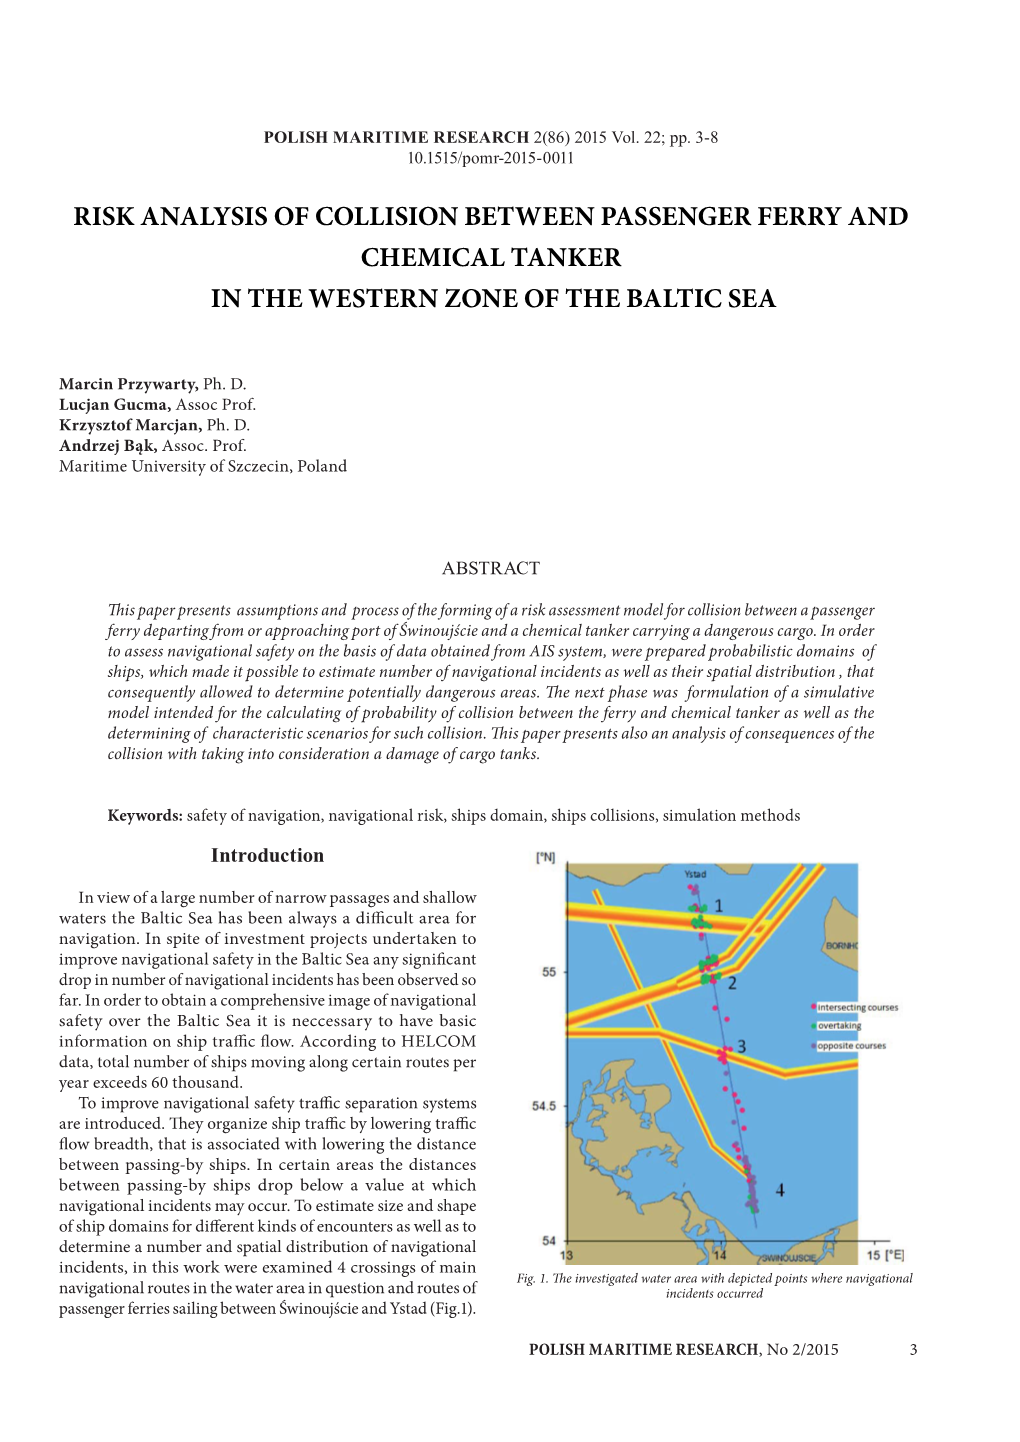 Risk Analysis of Collision Between Passenger Ferry and Chemical Tanker in the Western Zone of the Baltic Sea